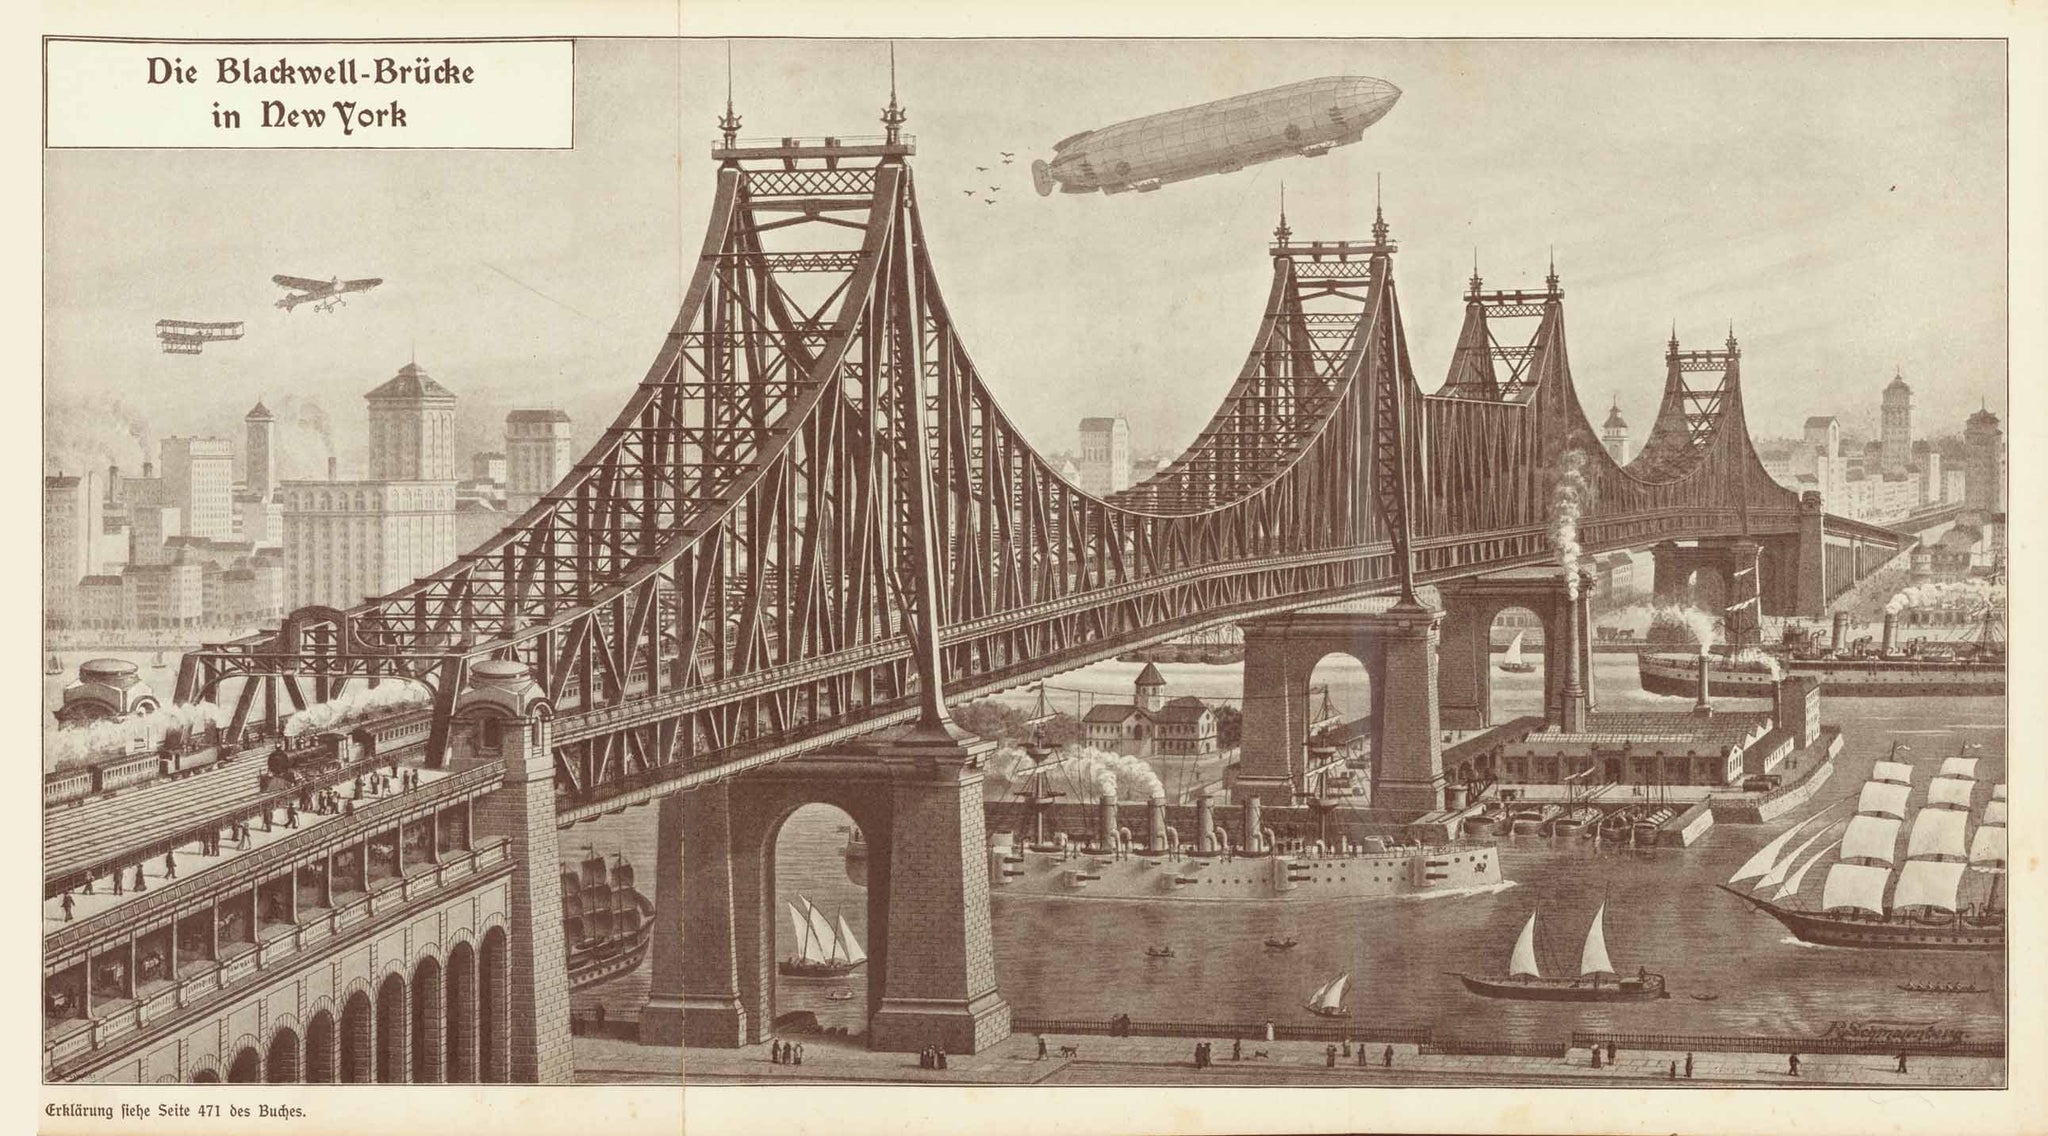 "Die Blackwell-Bruecke in New York"  Blackwell's Bridge in NYC.  Lithograph by R. Schmalenberg. His signature is in the lower right corner of this lithograph.It is undated. But it is safe to assume, that it was published in the year of inauguration  Blackwell's Bridge was named so during construction and for a short time after opening (1909).